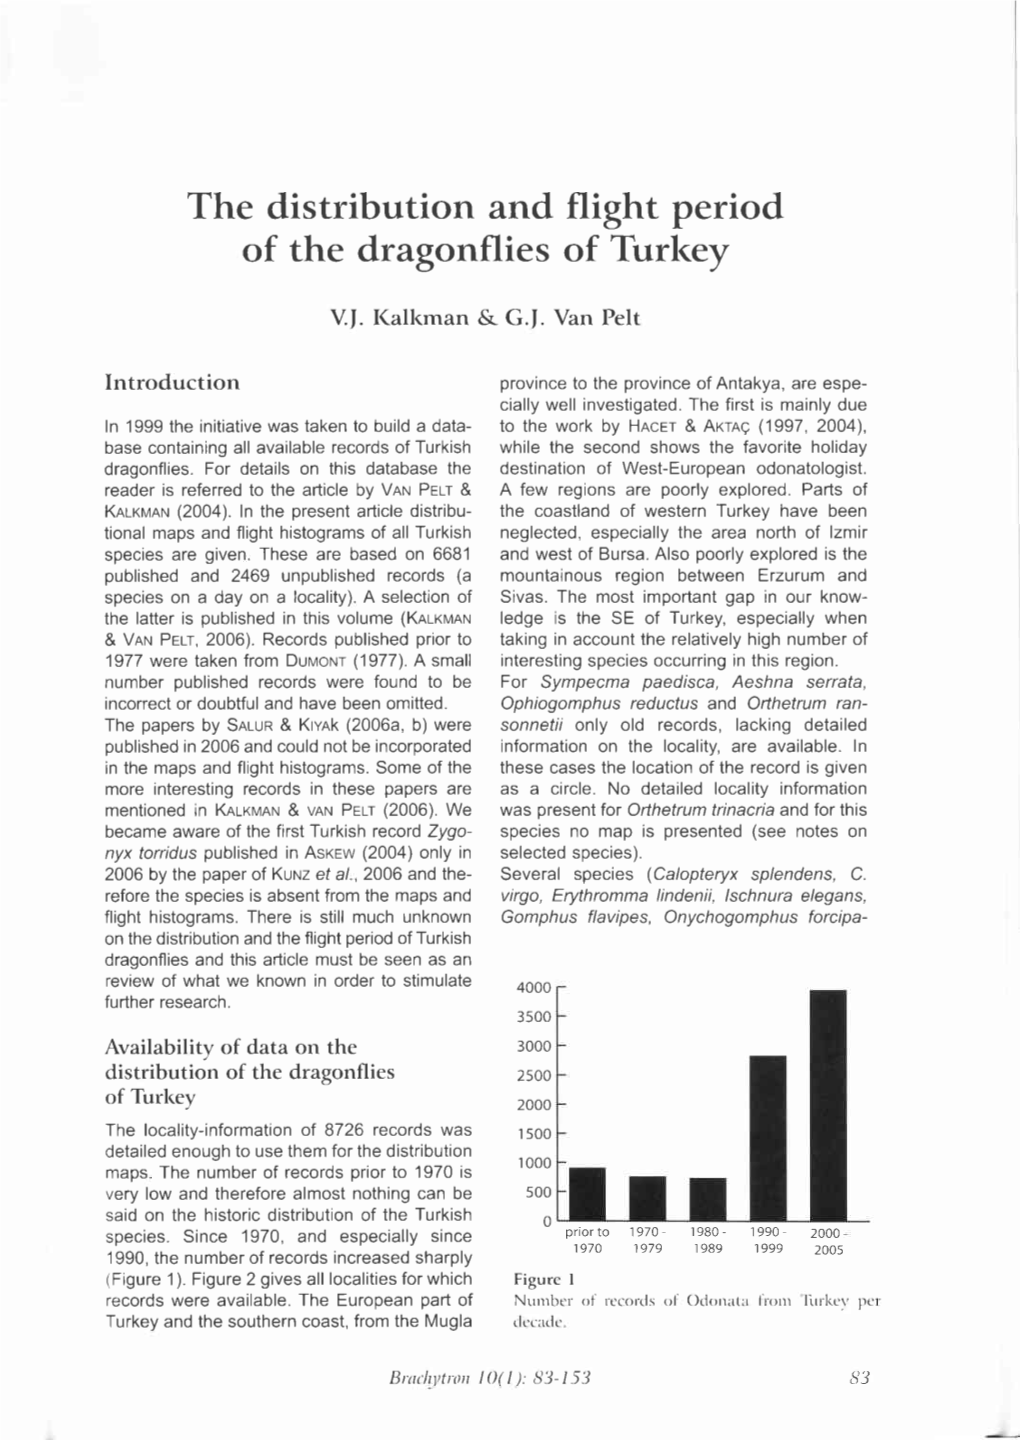 The Distribution and Flight Period of the Dragonflies of Turkey